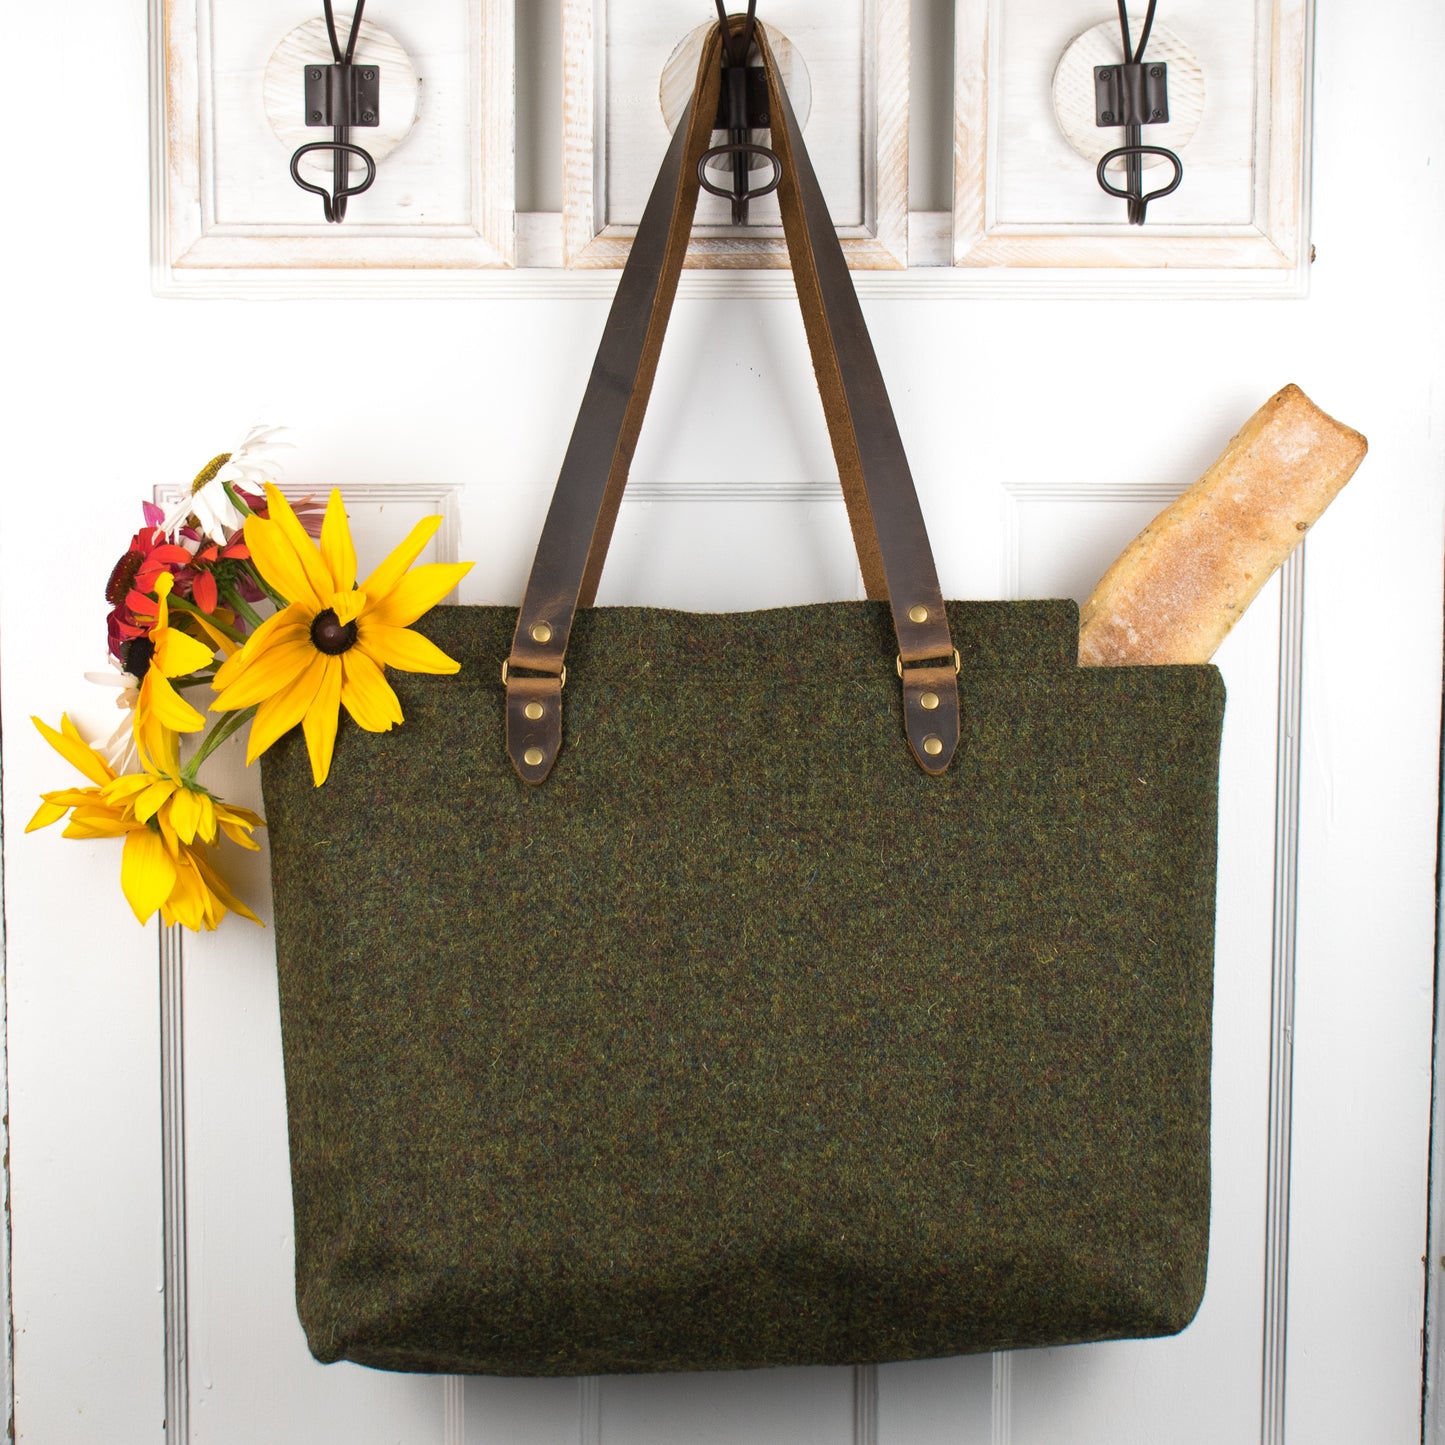 Market Tote - Moss Green - READY TO SHIP